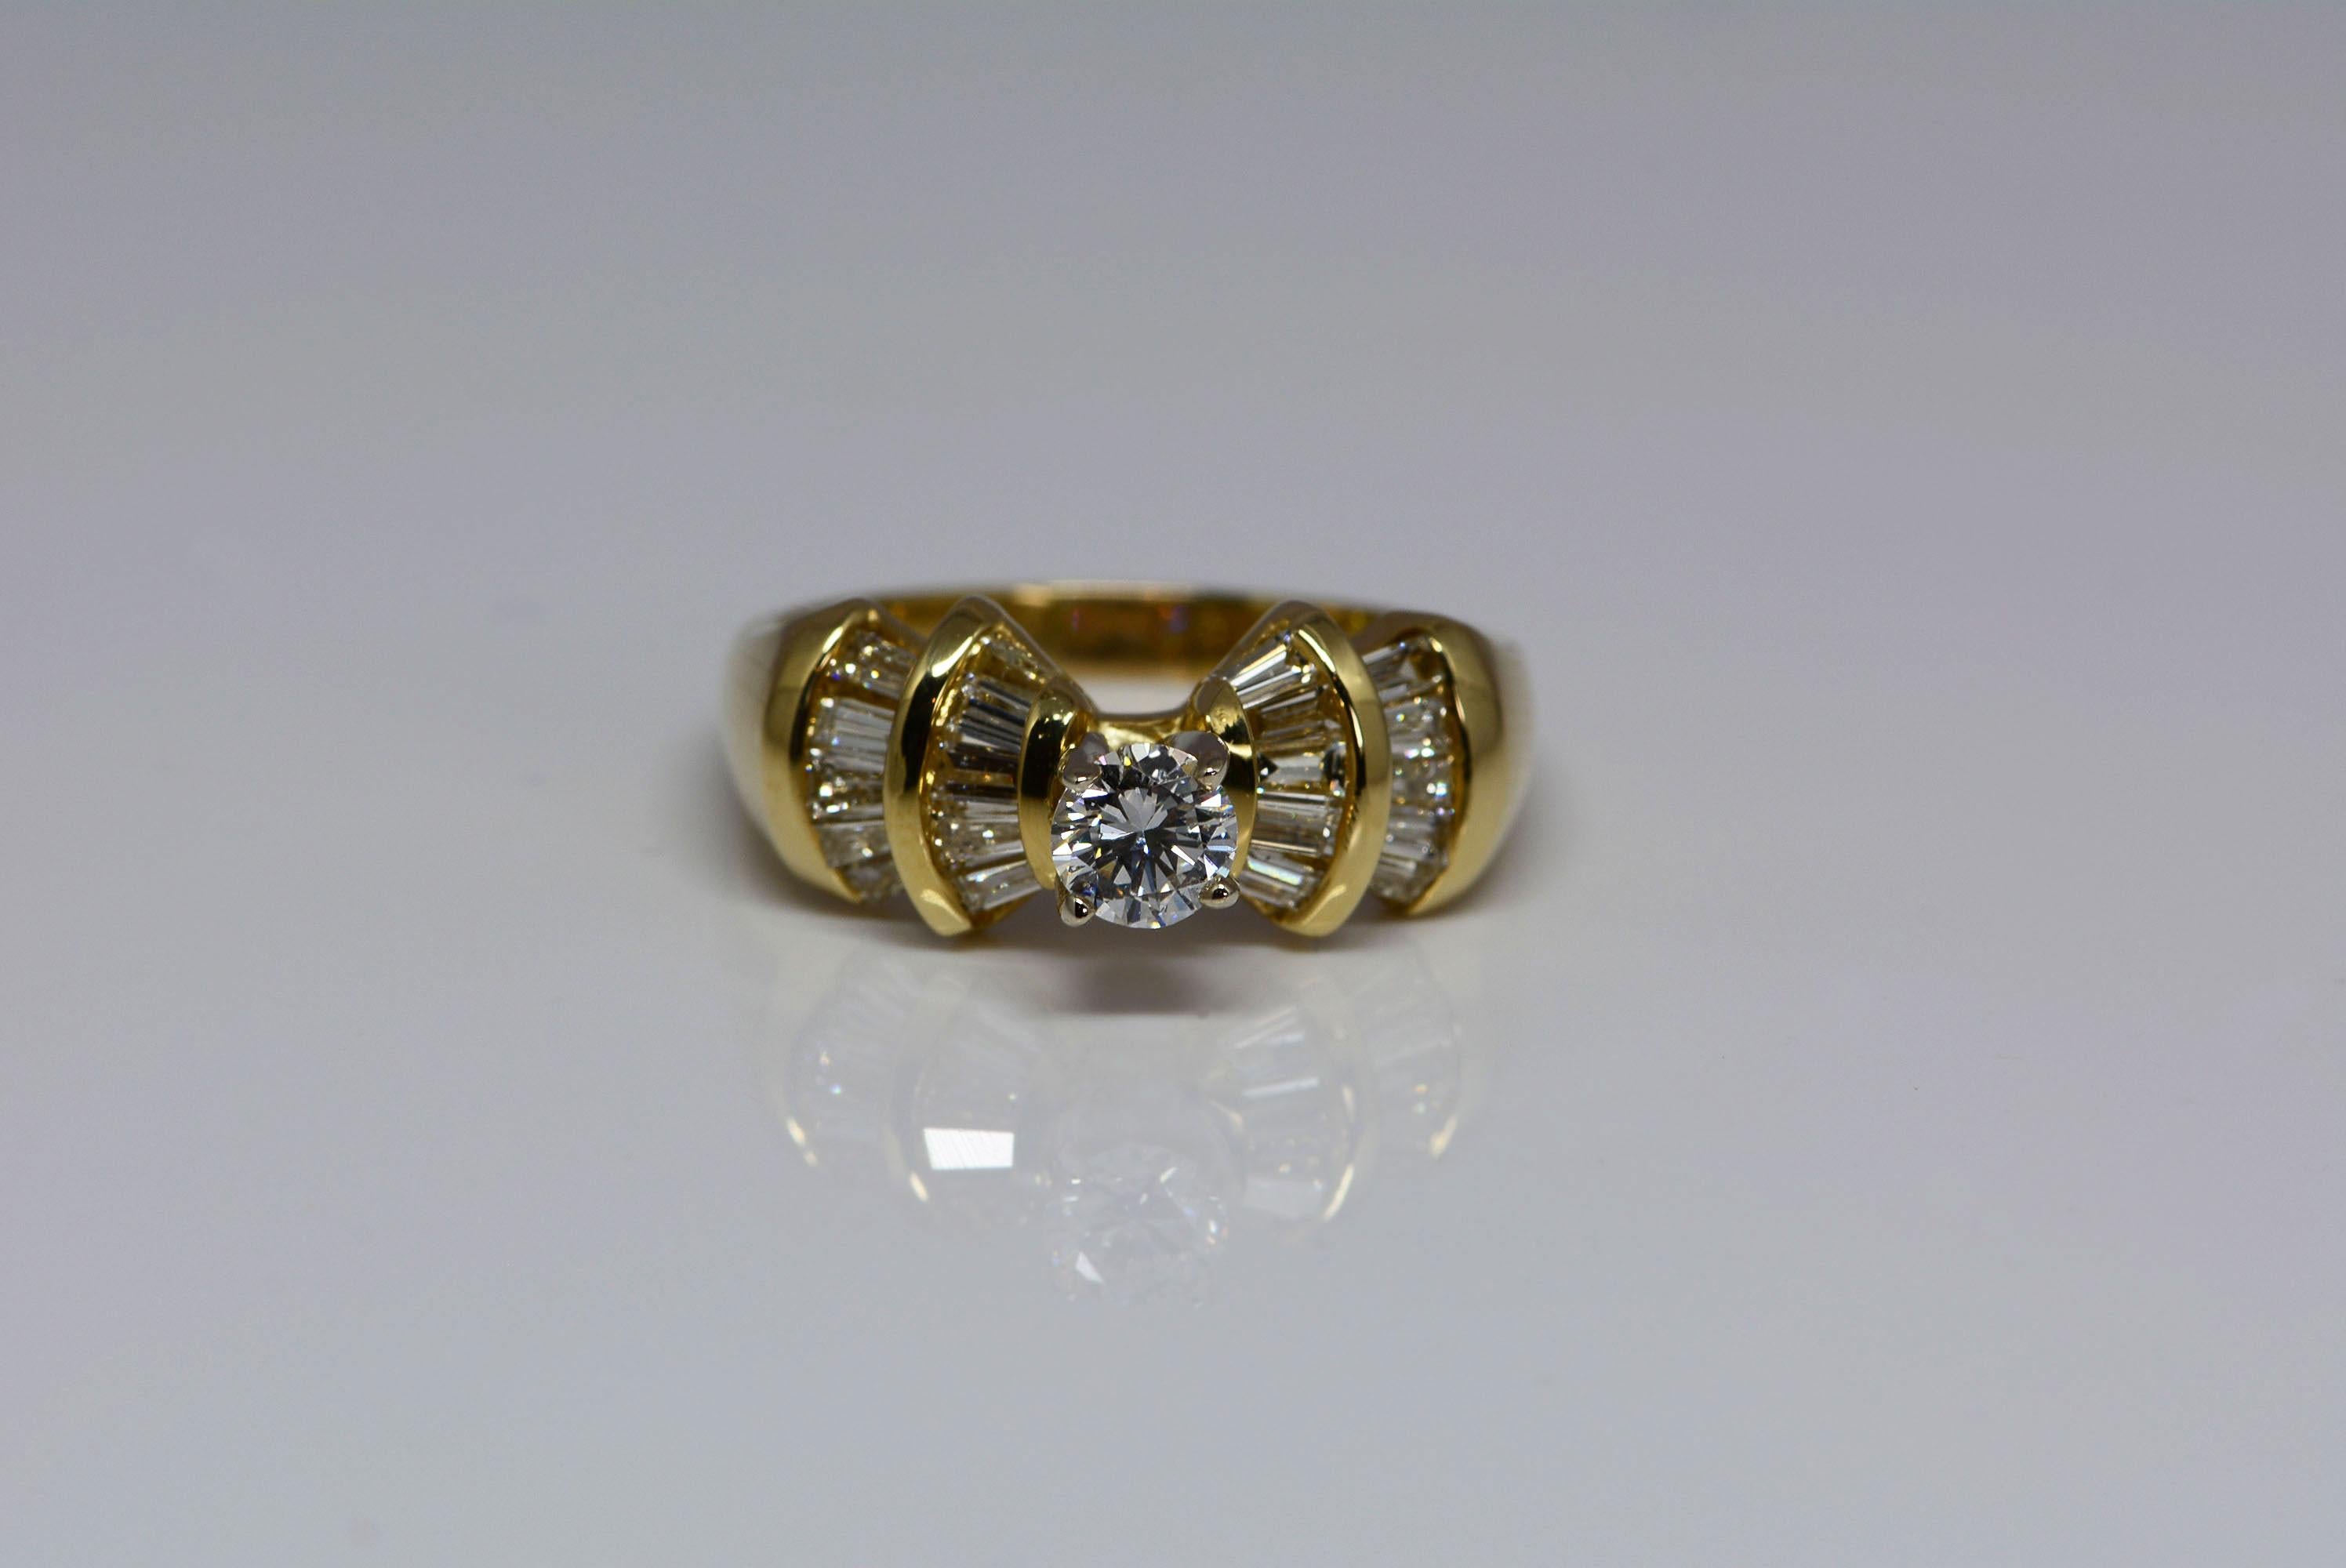 GIA 0.38 Carat E Color Diamond Contemporary Ring in 14 Karat Yellow Gold In New Condition For Sale In Aurora, Ontario